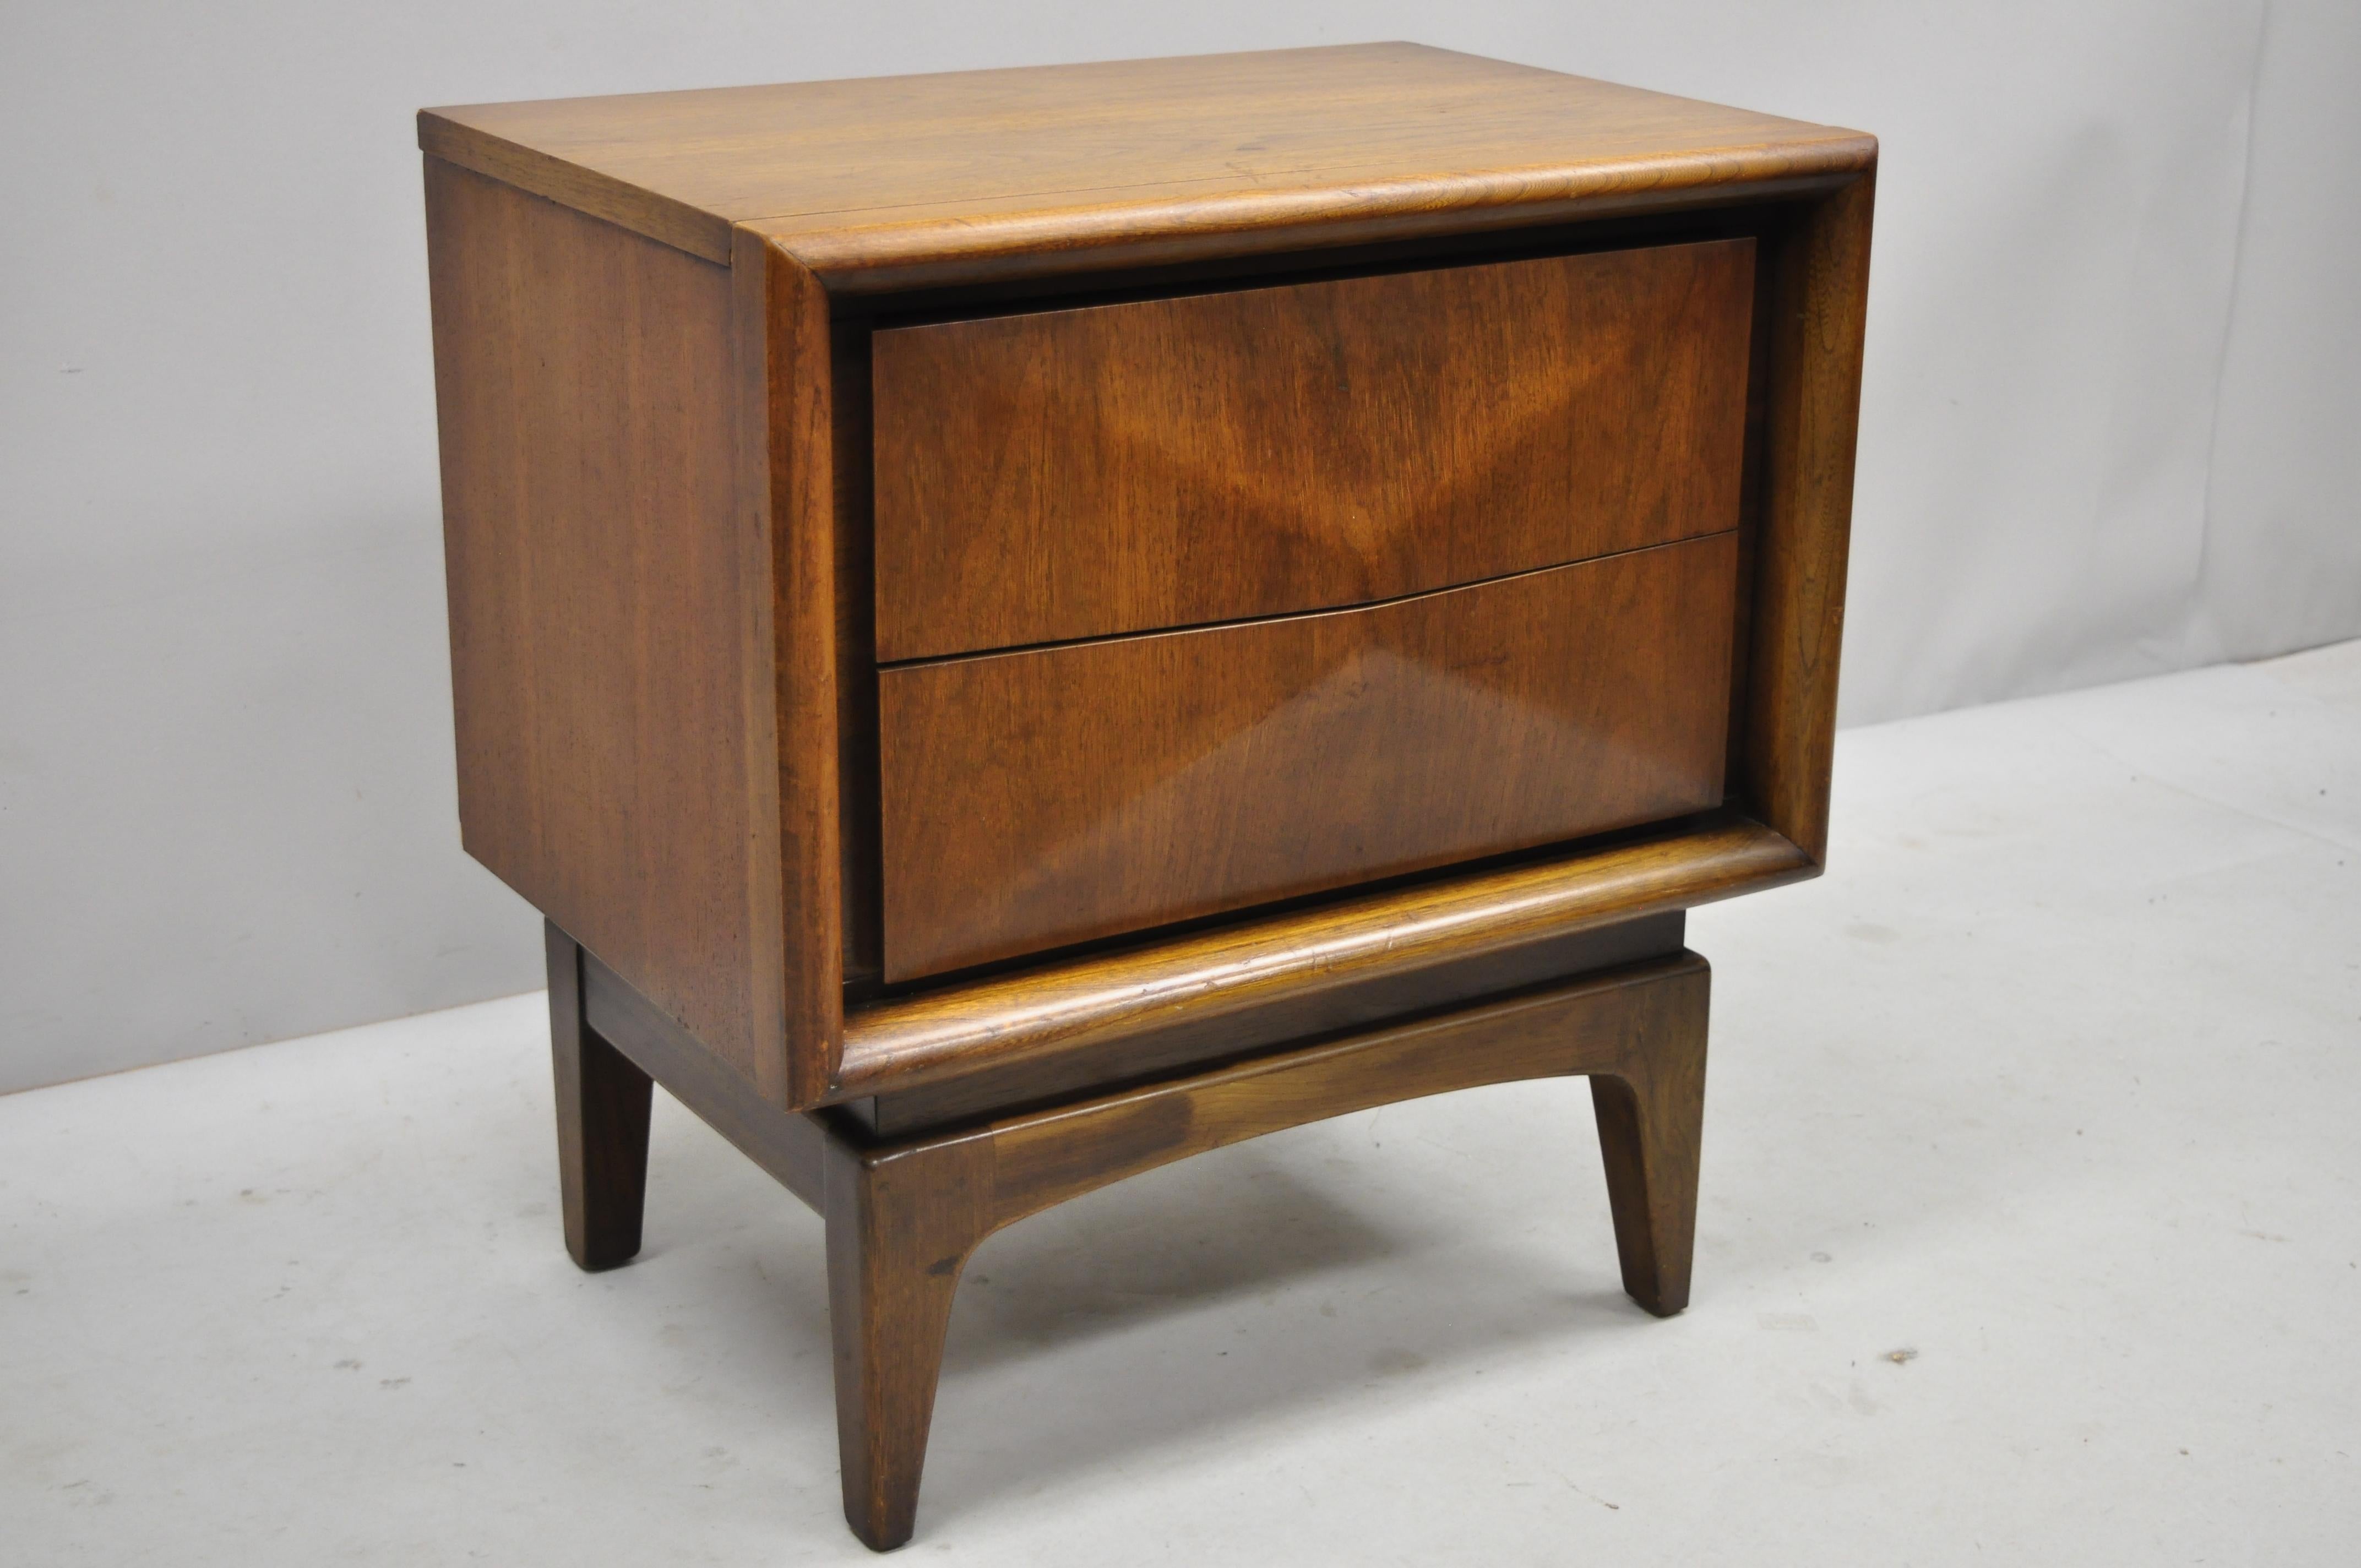 Vintage Mid-Century Modern diamond front walnut nightstand by United Furniture. Item includes 3 dimensional diamond front, beautiful wood grain, 2 dovetailed drawers, tapered legs, clean modernist lines, sleek sculptural form. Mid-20th century.